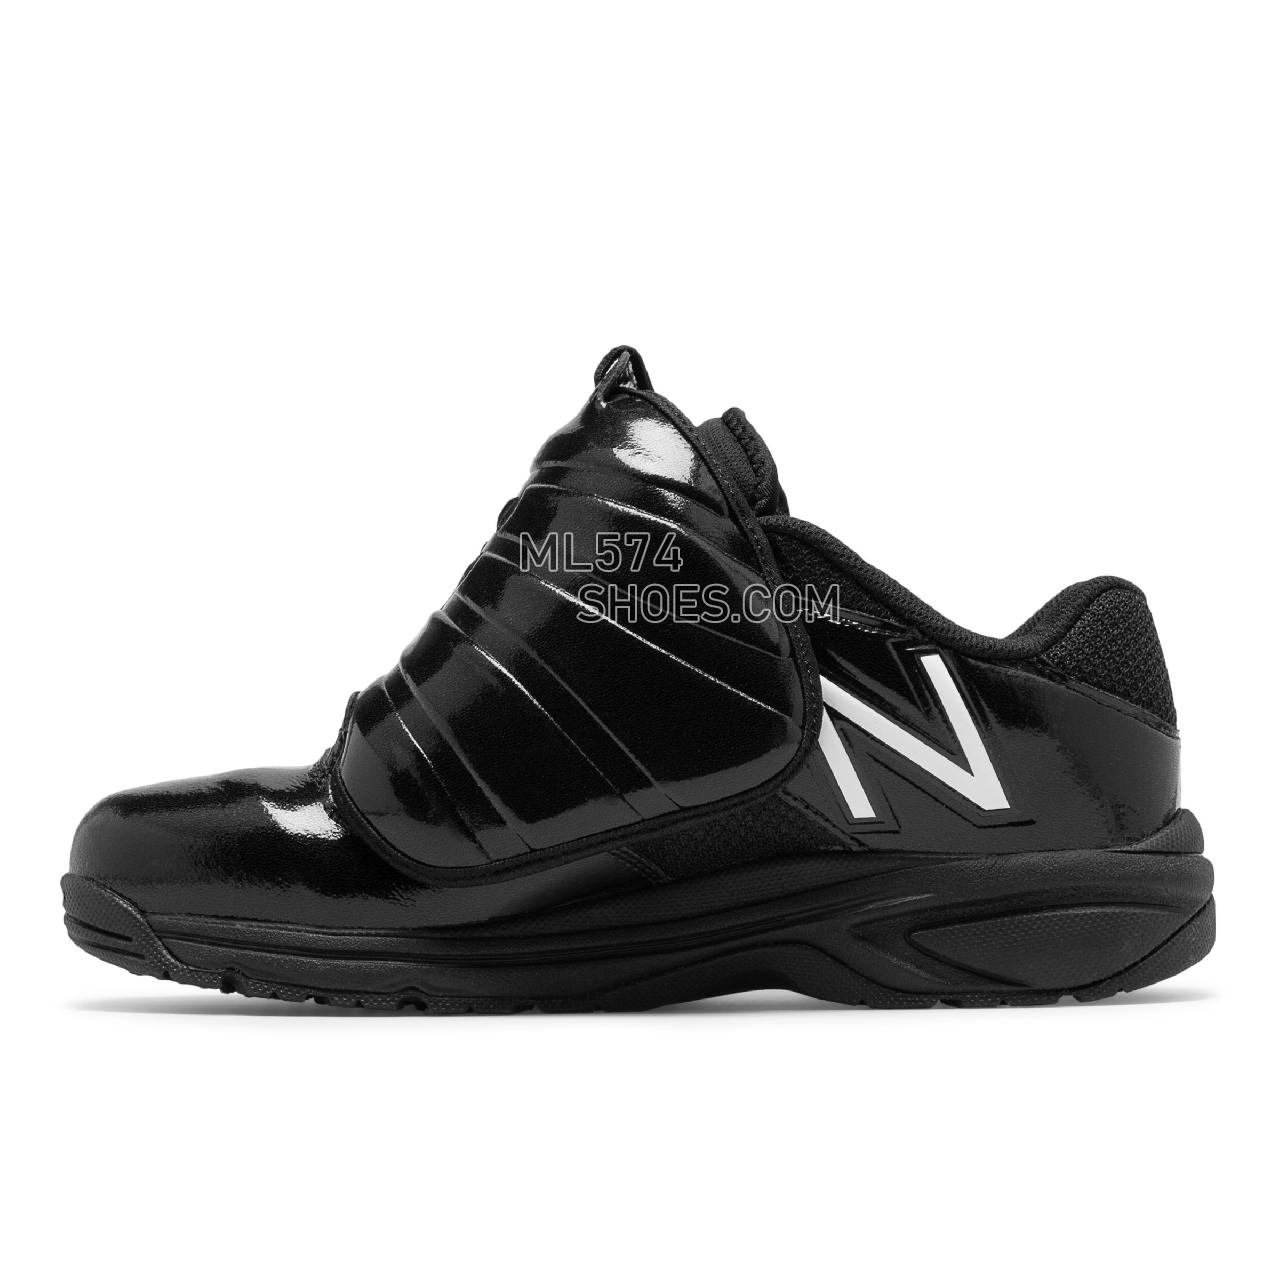 New Balance 460v3 Low Umpire Plate - Men's Umpire Footwear - Black with White - MUL460T3